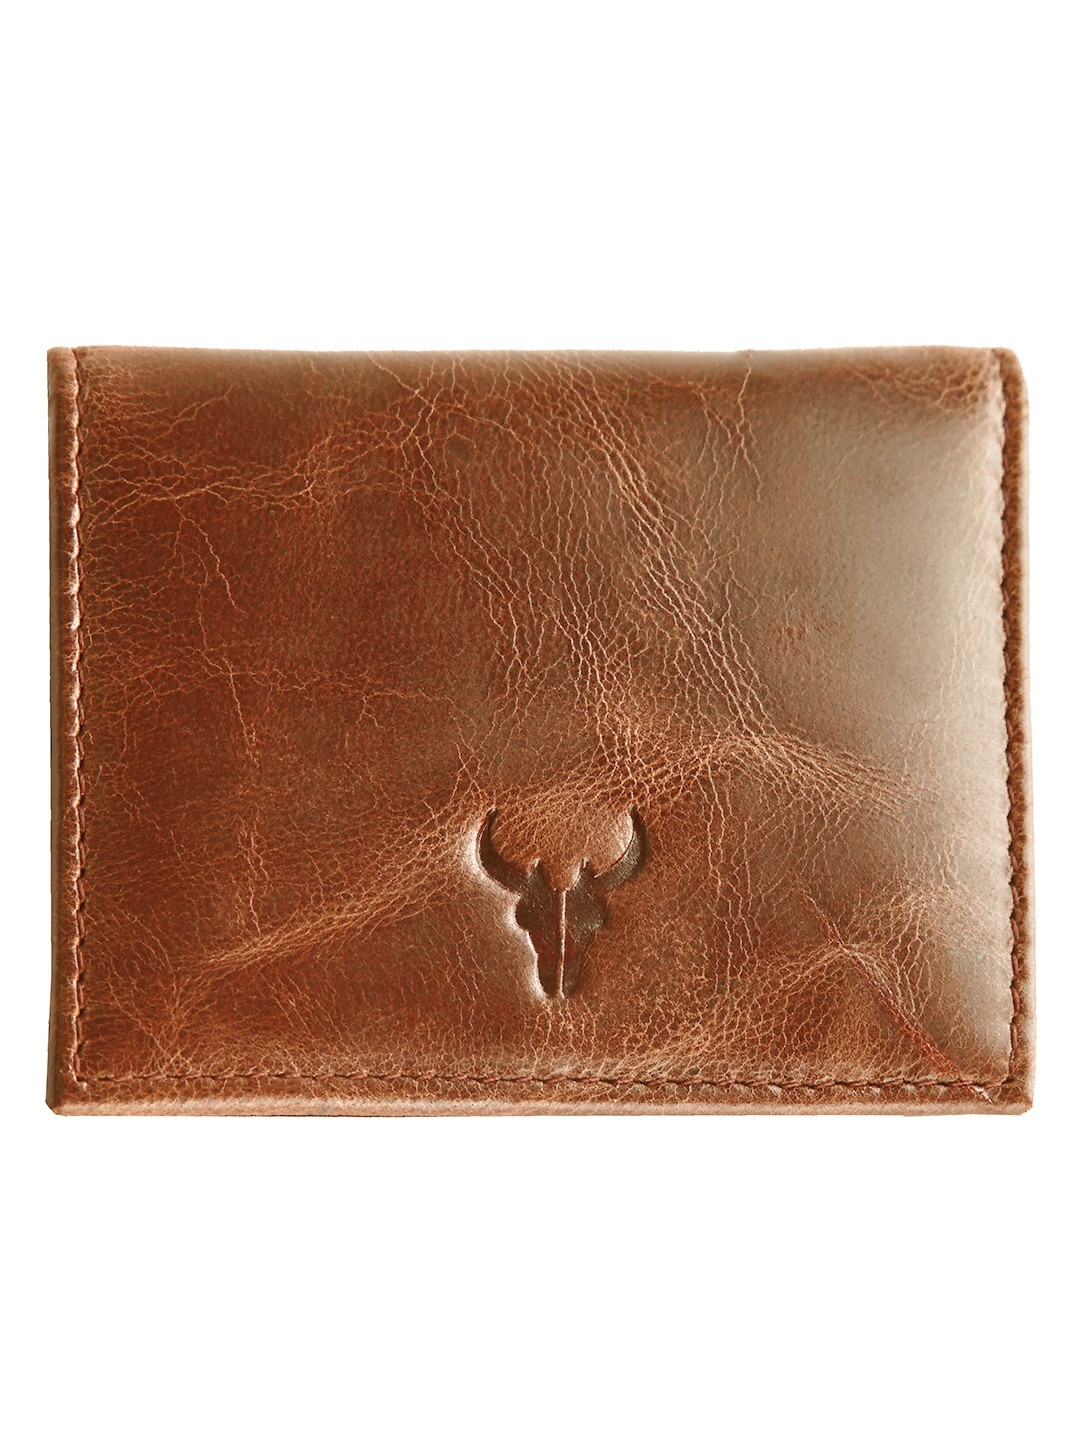 Napa Hide | Napa Hide RFID Protected Genuine High Quality Leather Light Tan Wallet for Men